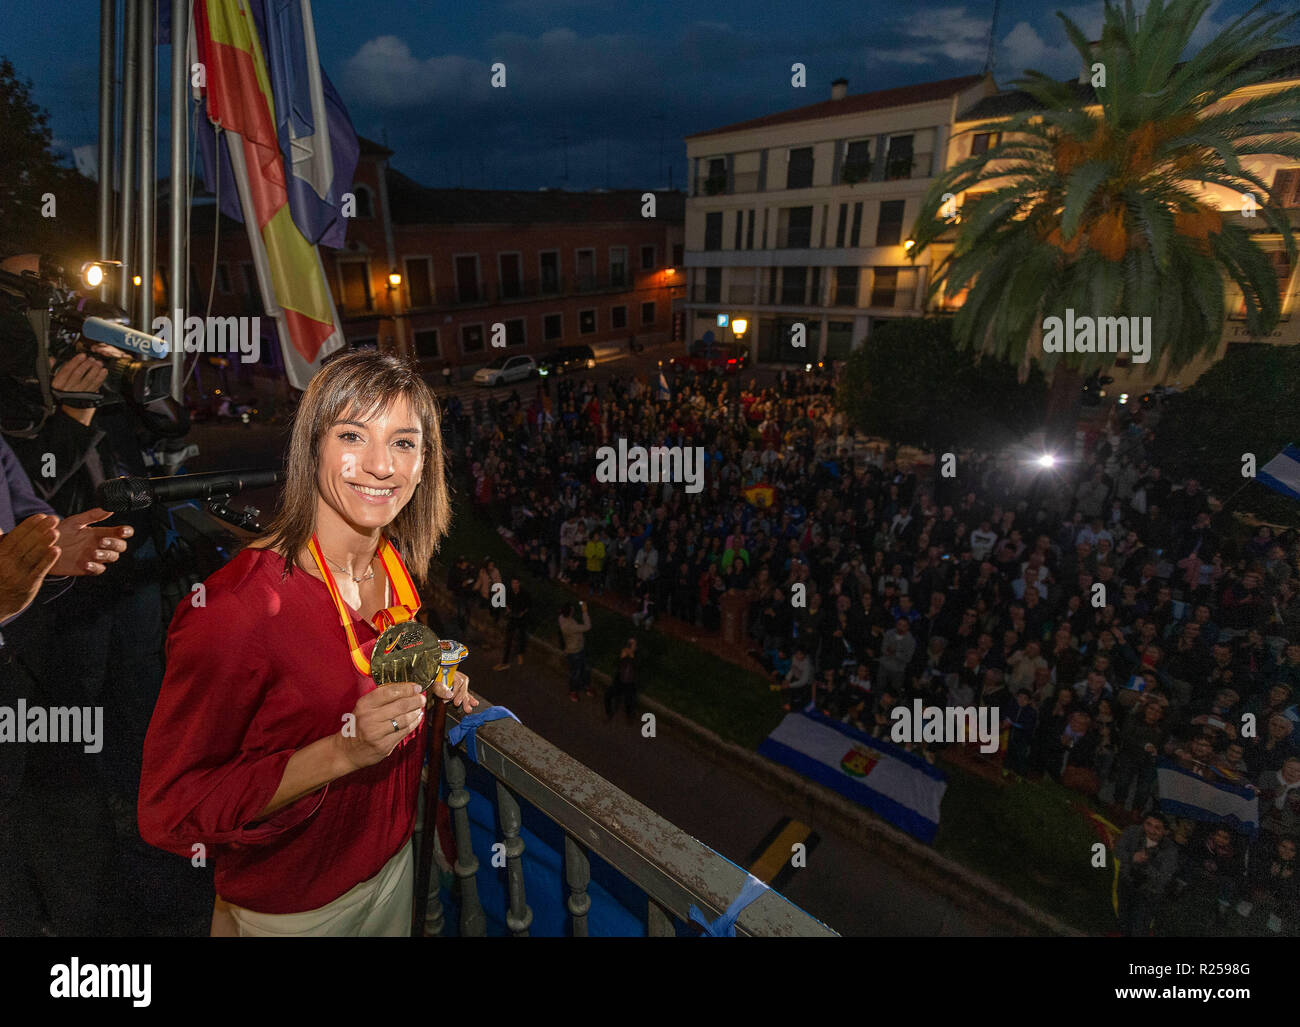 Spanish Karateka Sandra Sanchez seen posing with her Gold medal during the celebrations at her home town in Talavera de la Reina. Stock Photo